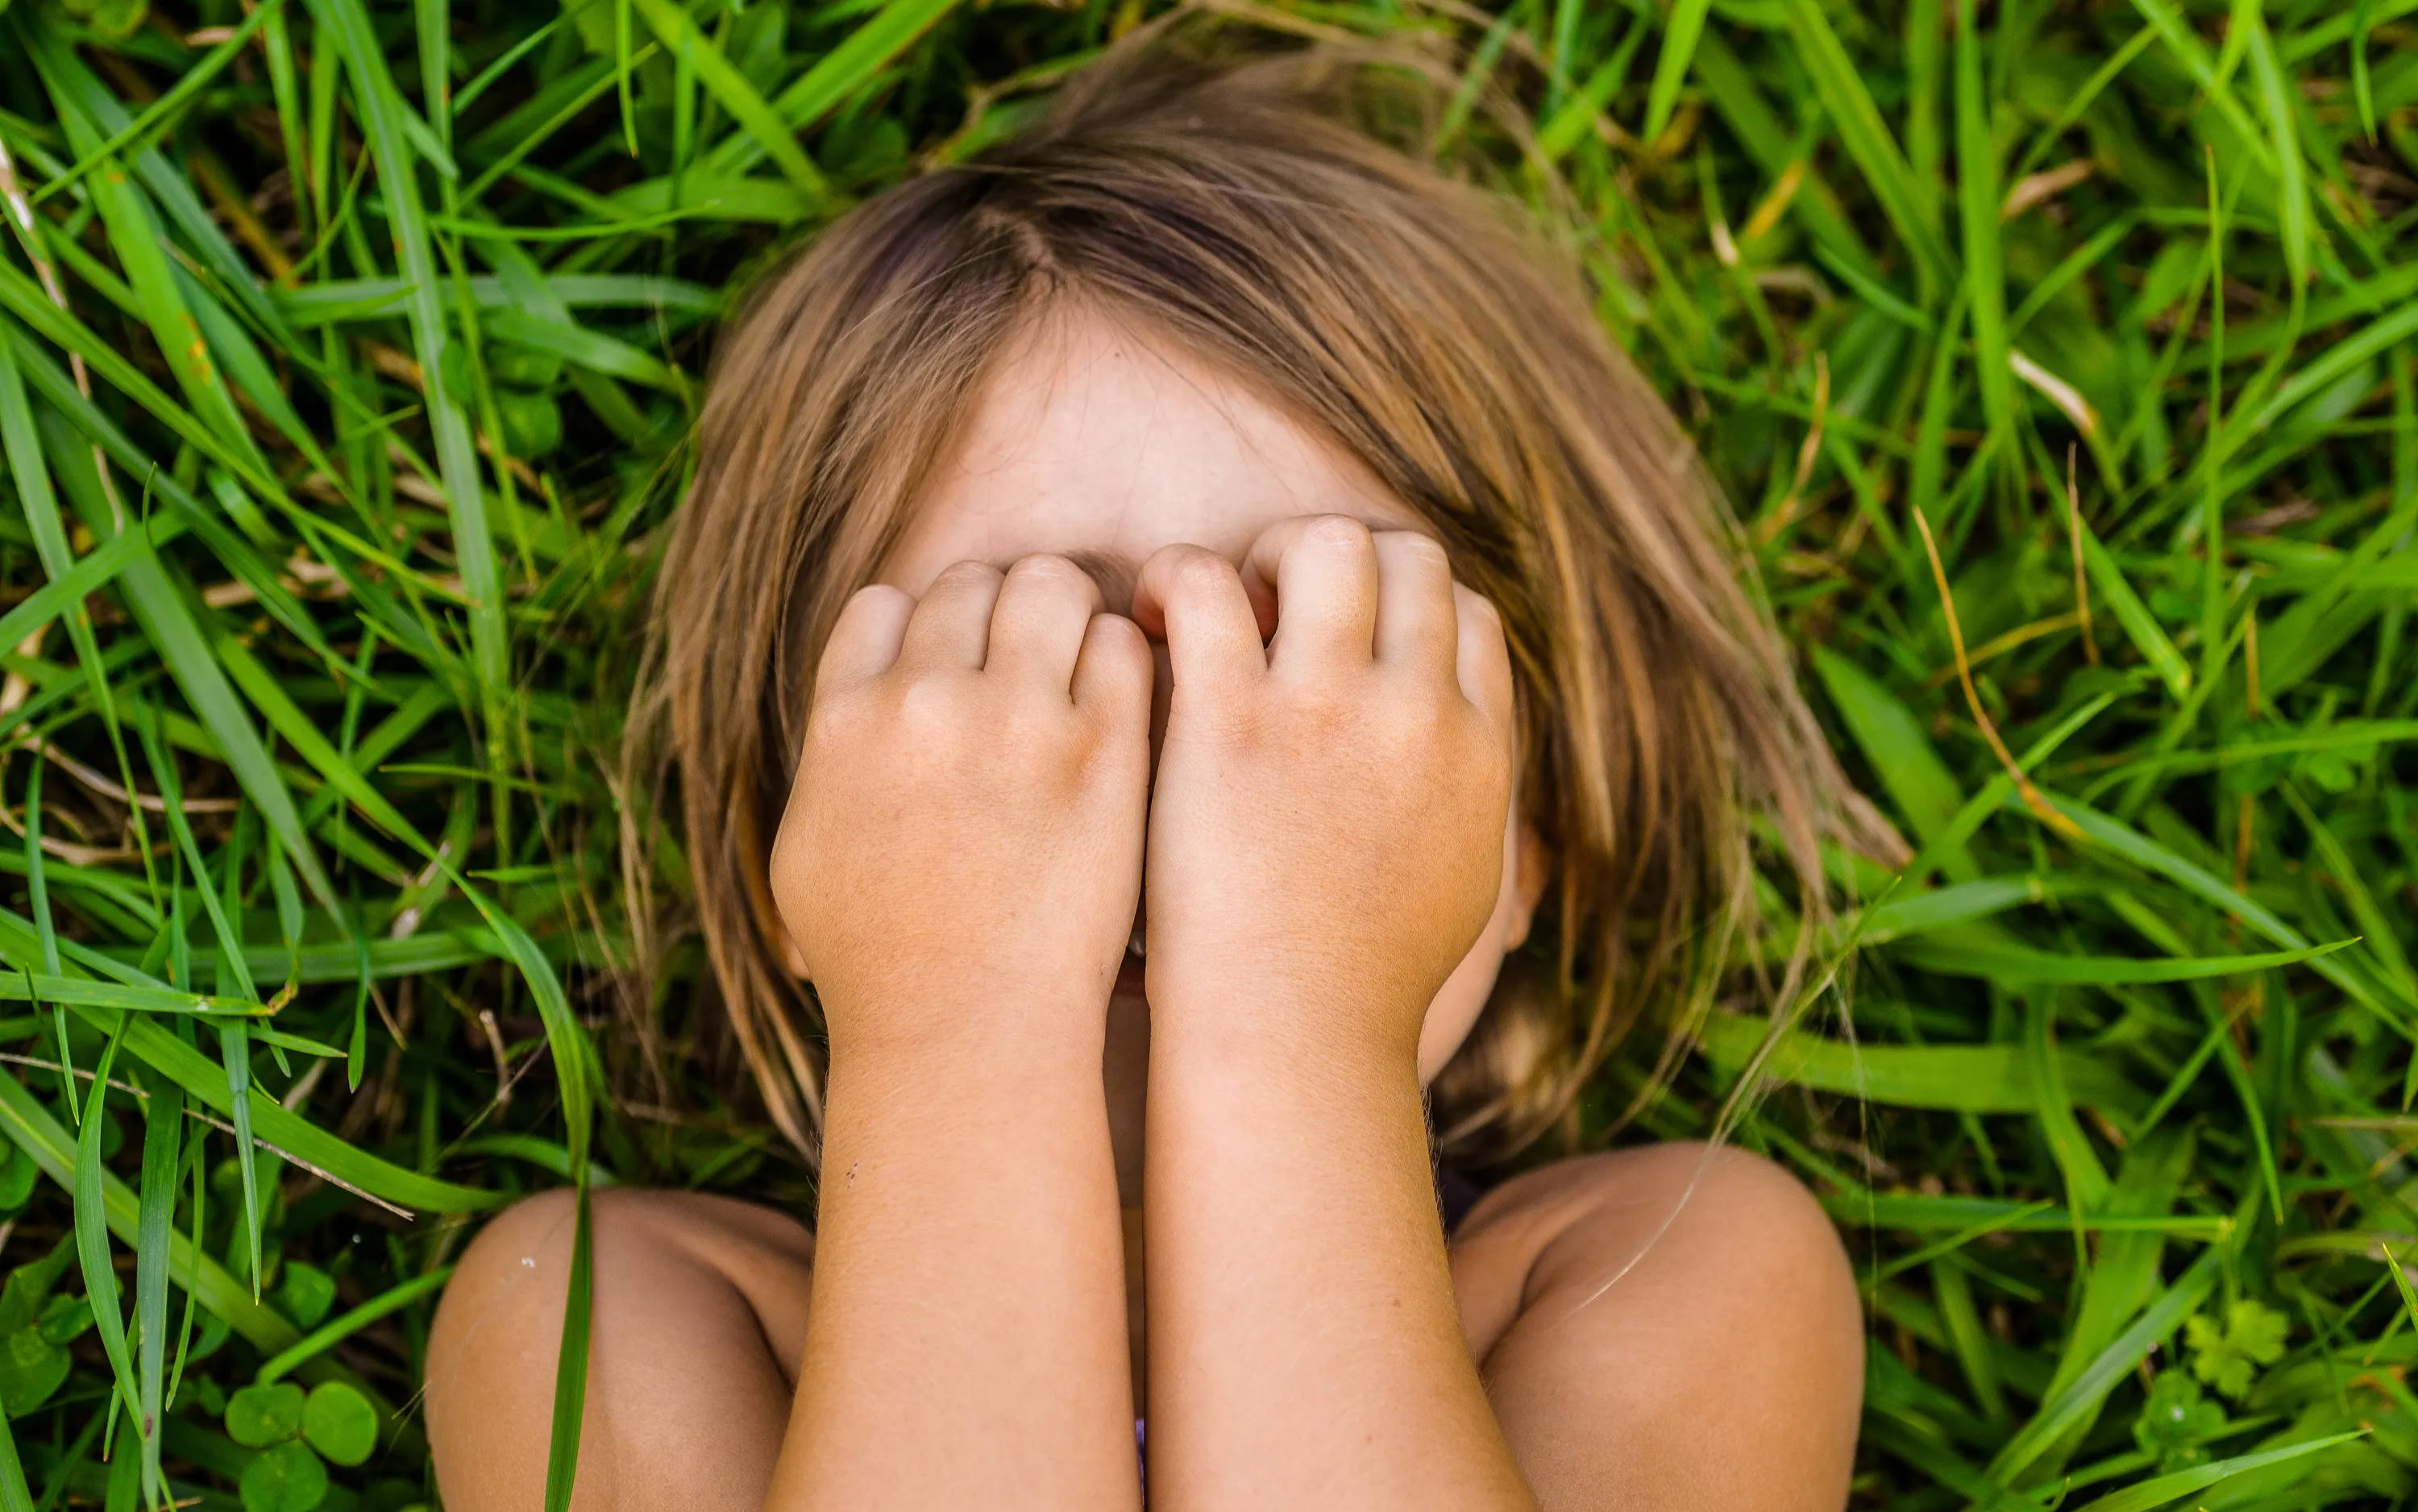 Girl lying on lush green grass covering her eyes with her hands – it’s summer and grass pollen can trigger kids’ allergy eyes